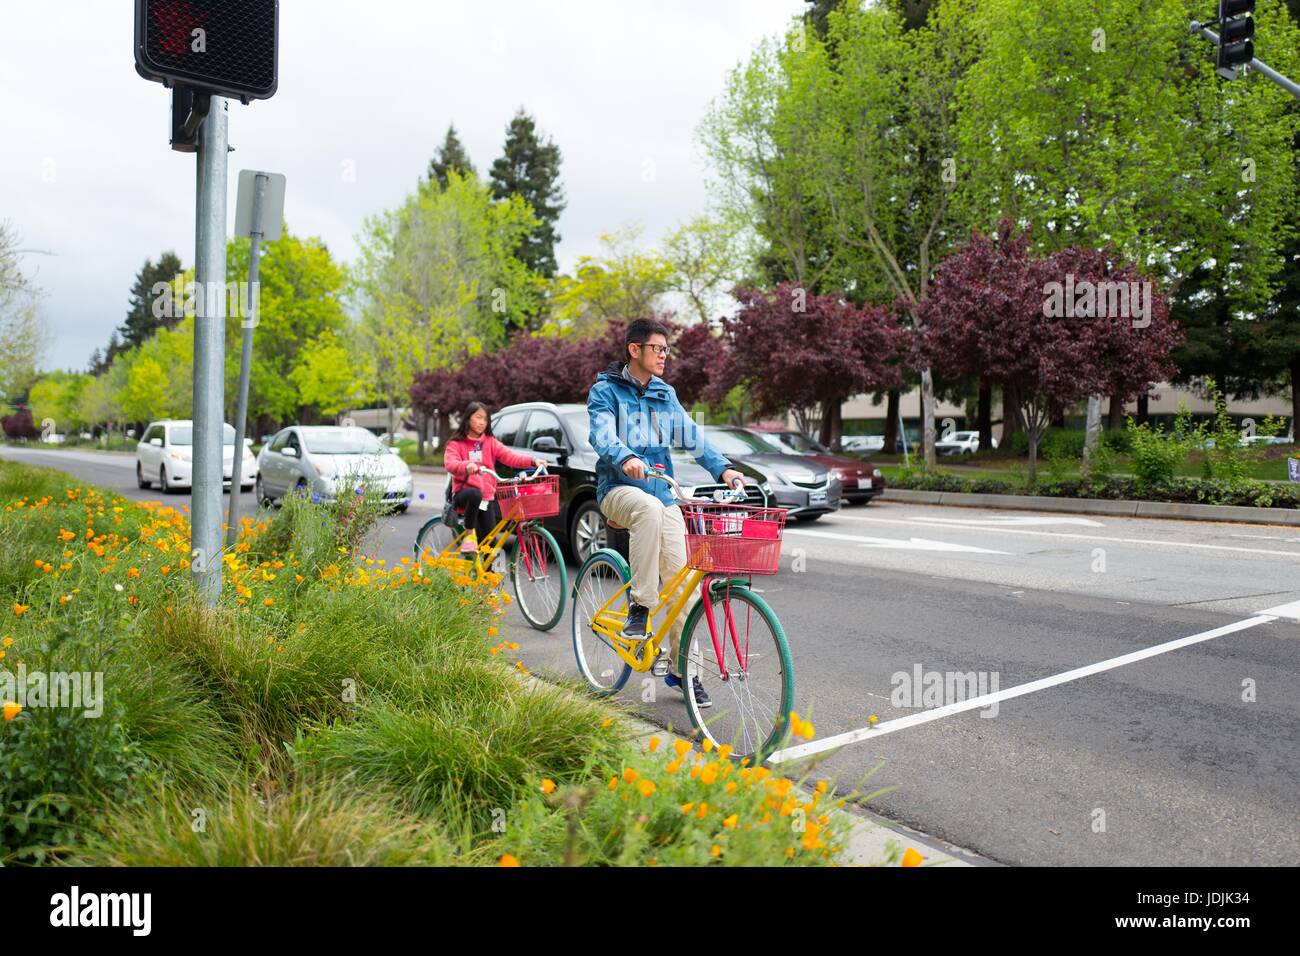 Technology workers for Google Inc ride colorful Google Bikes on a road near a bed of flowers, at the Googleplex, headquarters of Google Inc in the Silicon Valley town of Mountain View, California, April 7, 2017. Stock Photo